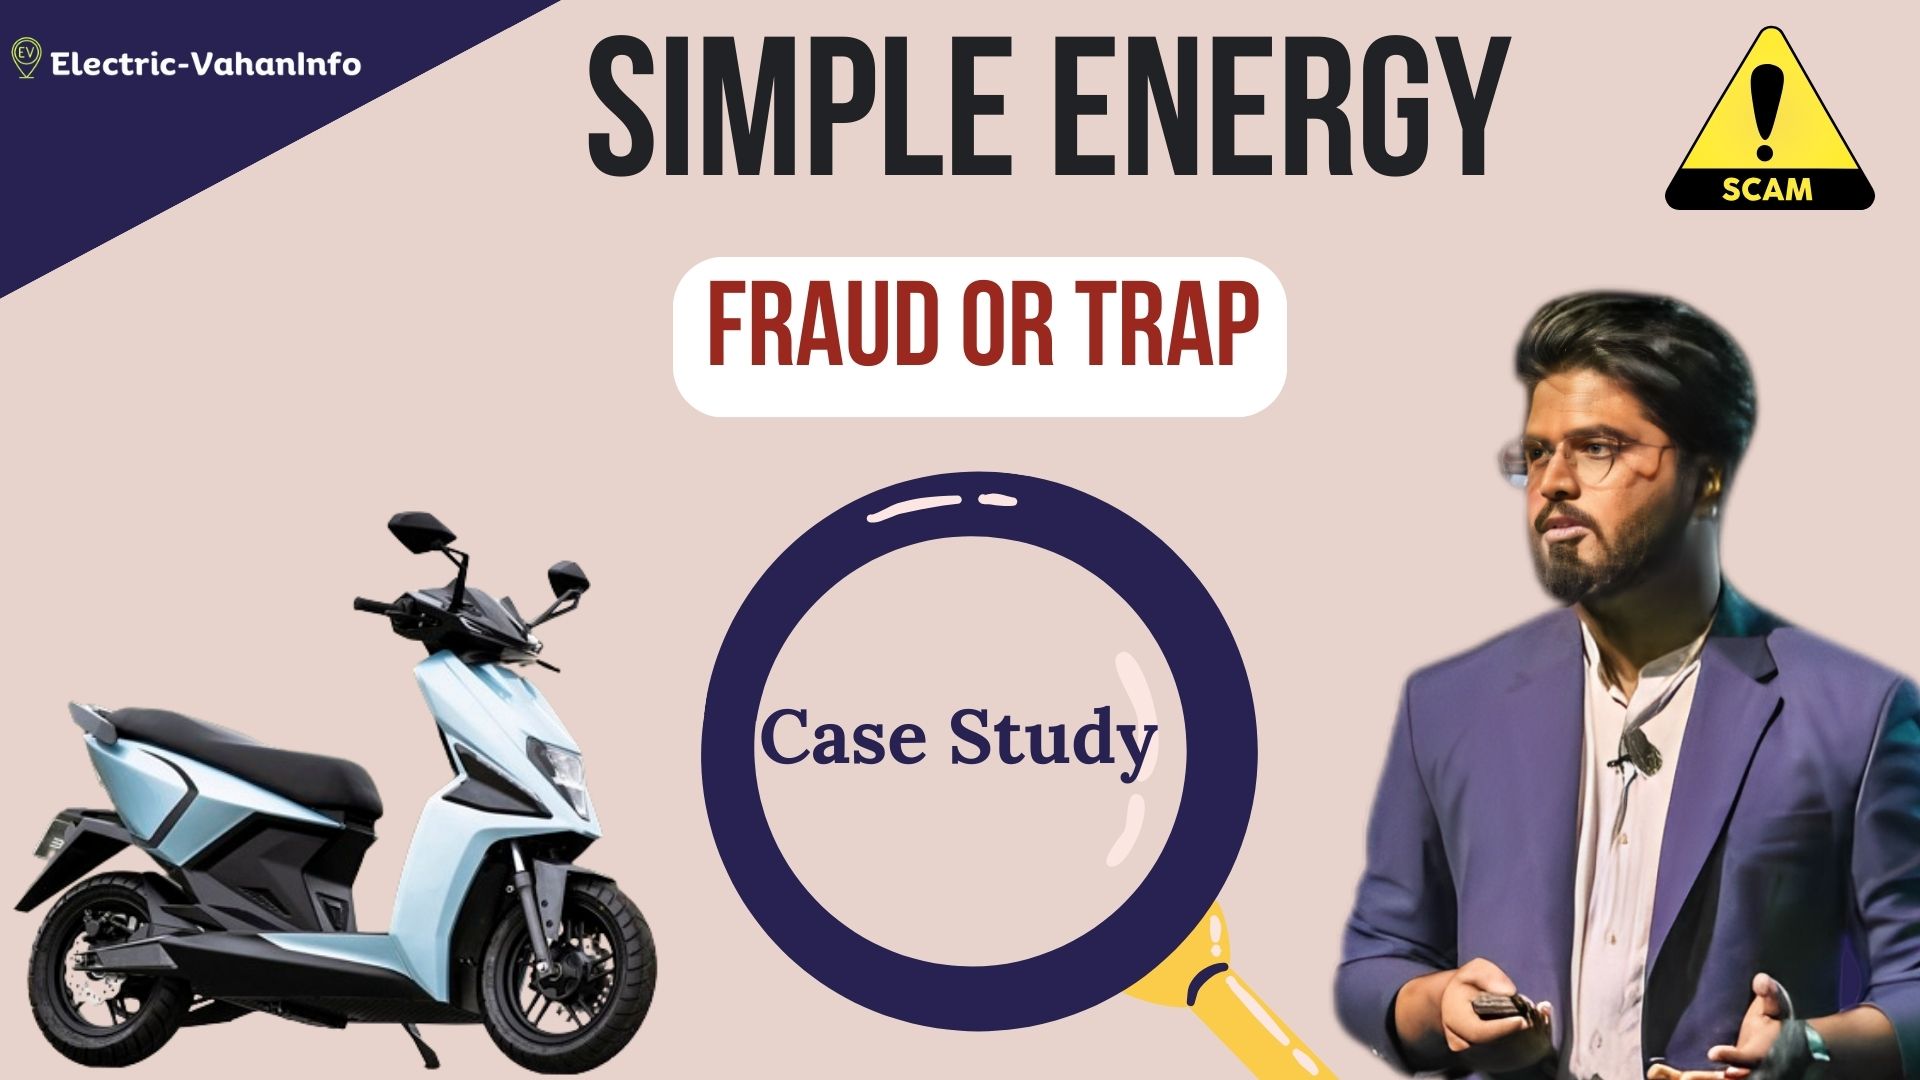 https://electric-vahaninfo.com/how-simple-energy-has-become-complicated-energy-case-study/